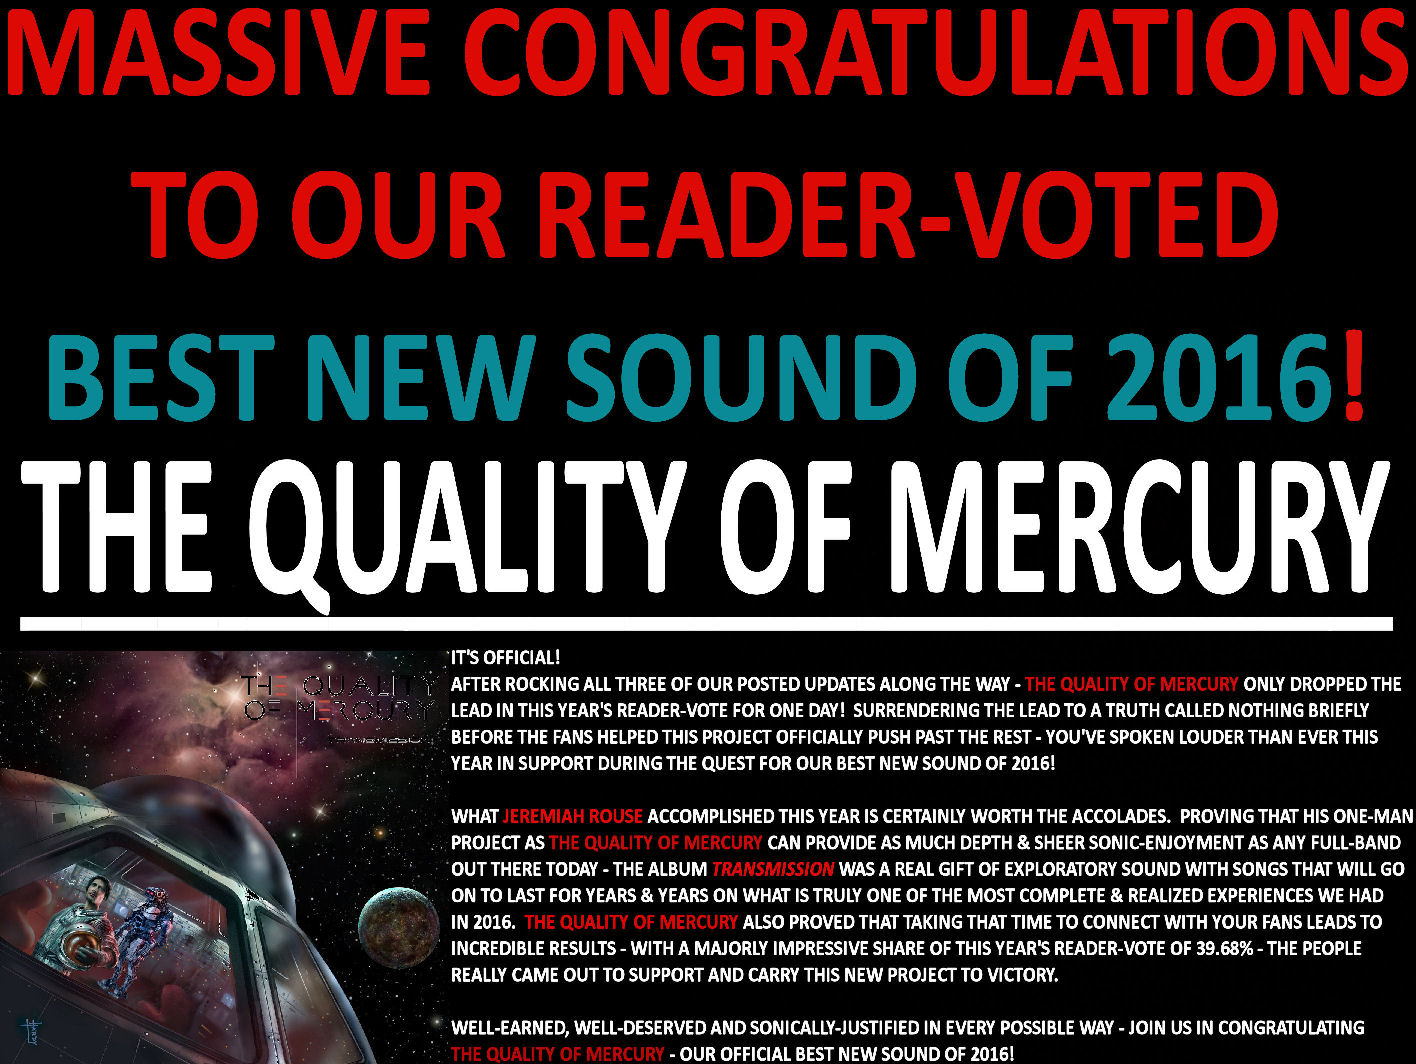  The Official Best New Sound Of 2016!